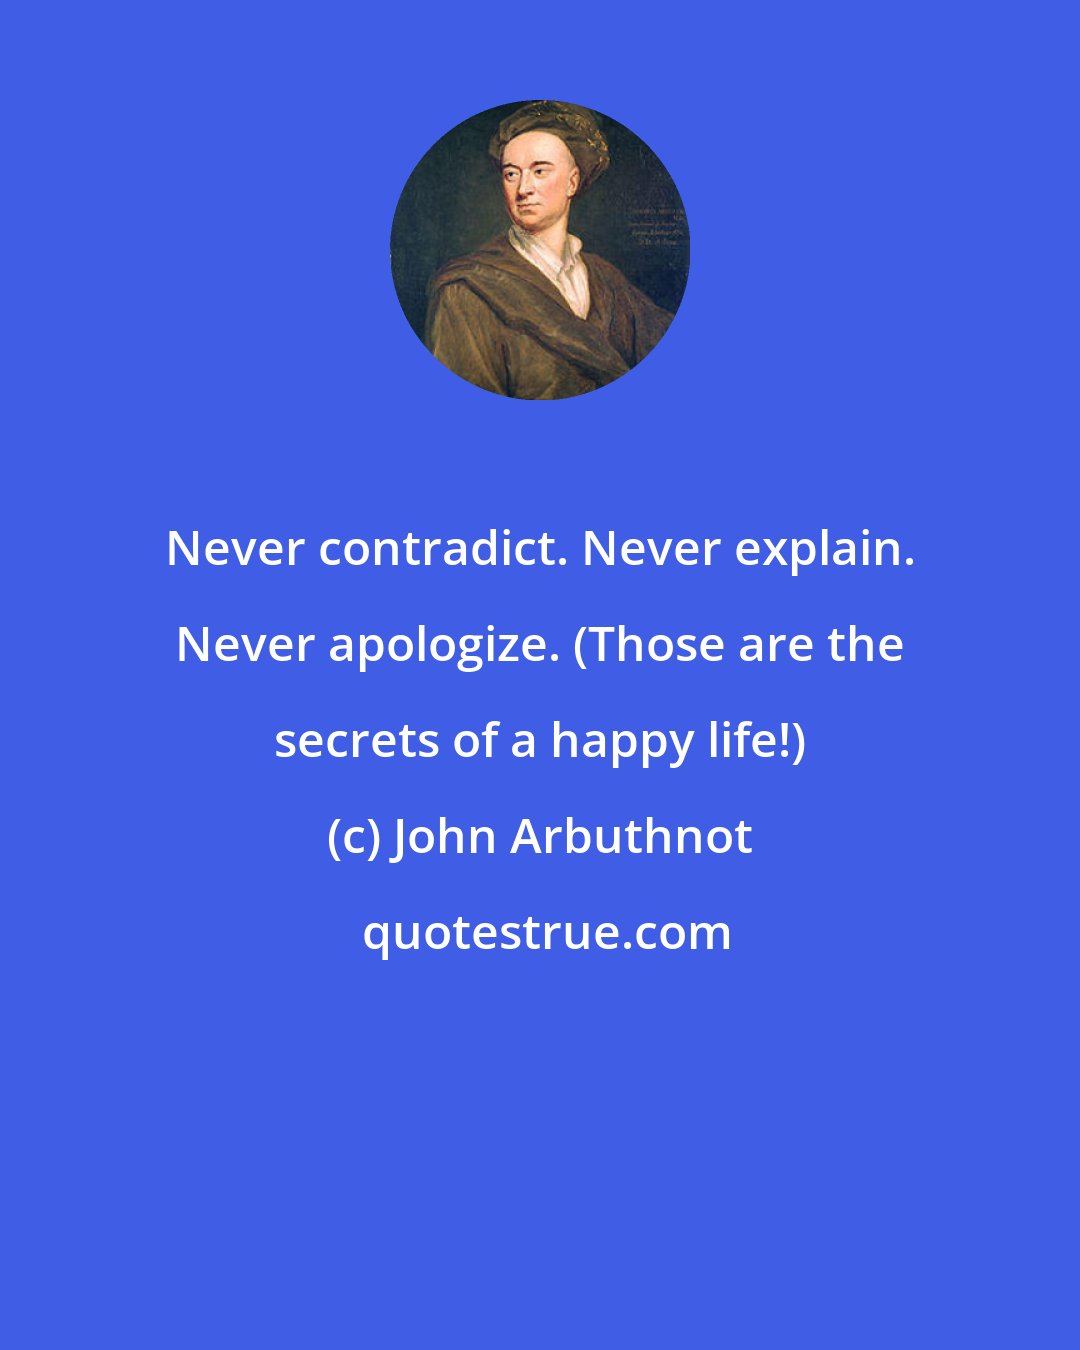 John Arbuthnot: Never contradict. Never explain. Never apologize. (Those are the secrets of a happy life!)